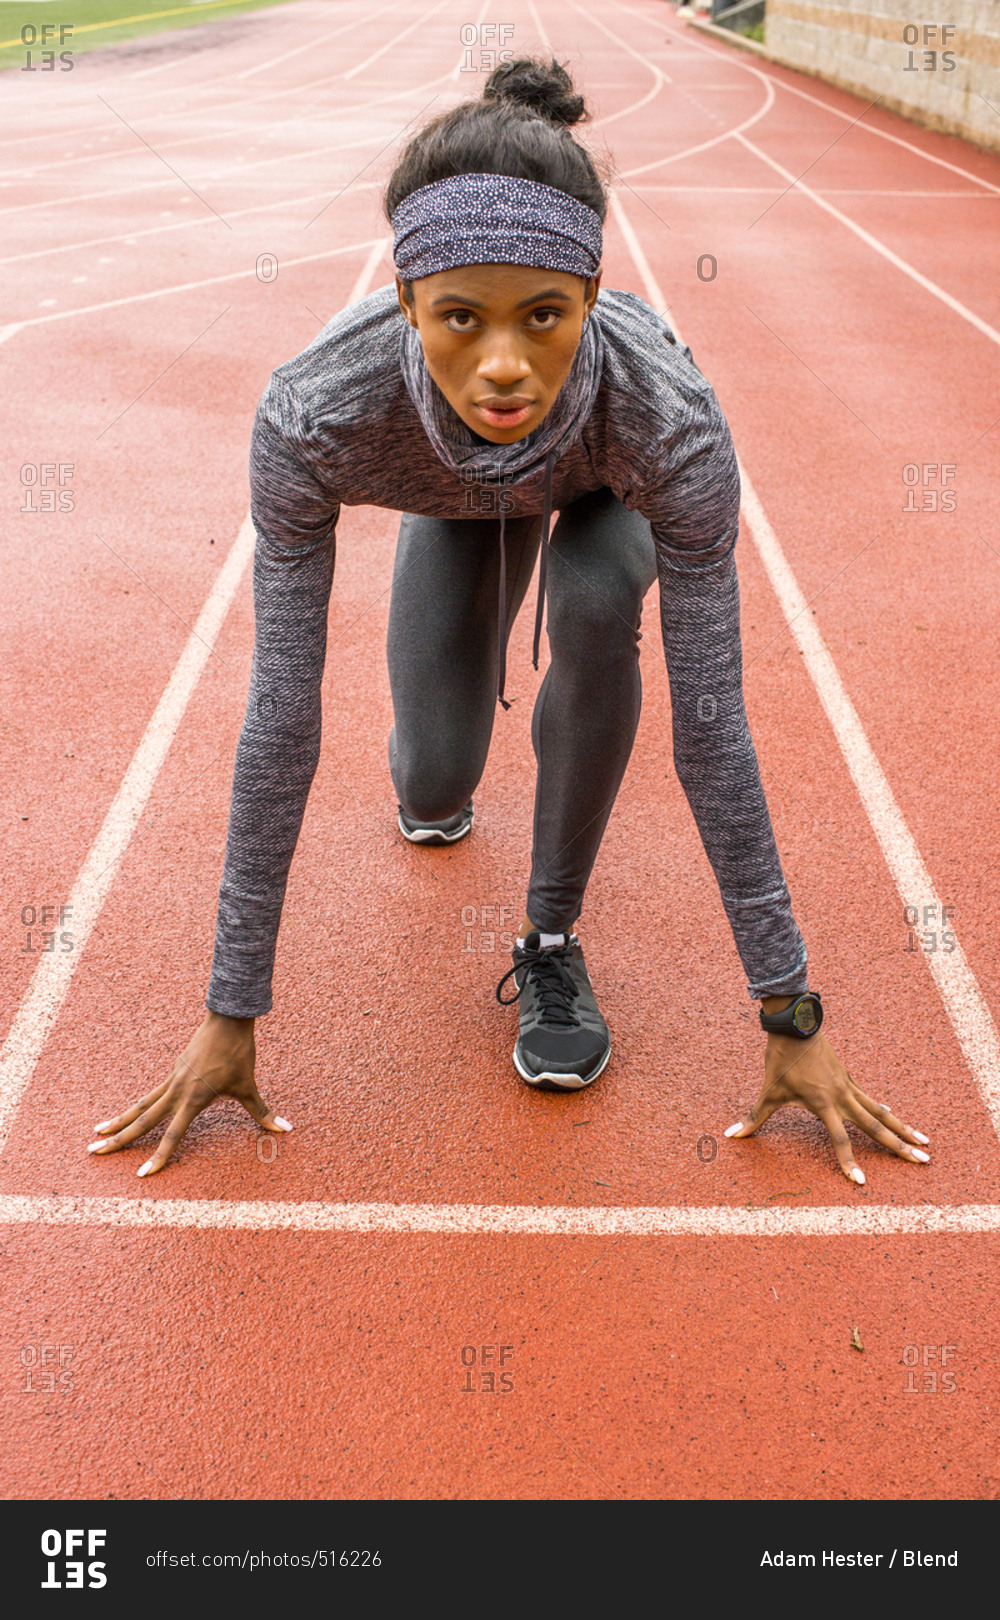 Black woman waiting at starting line on track